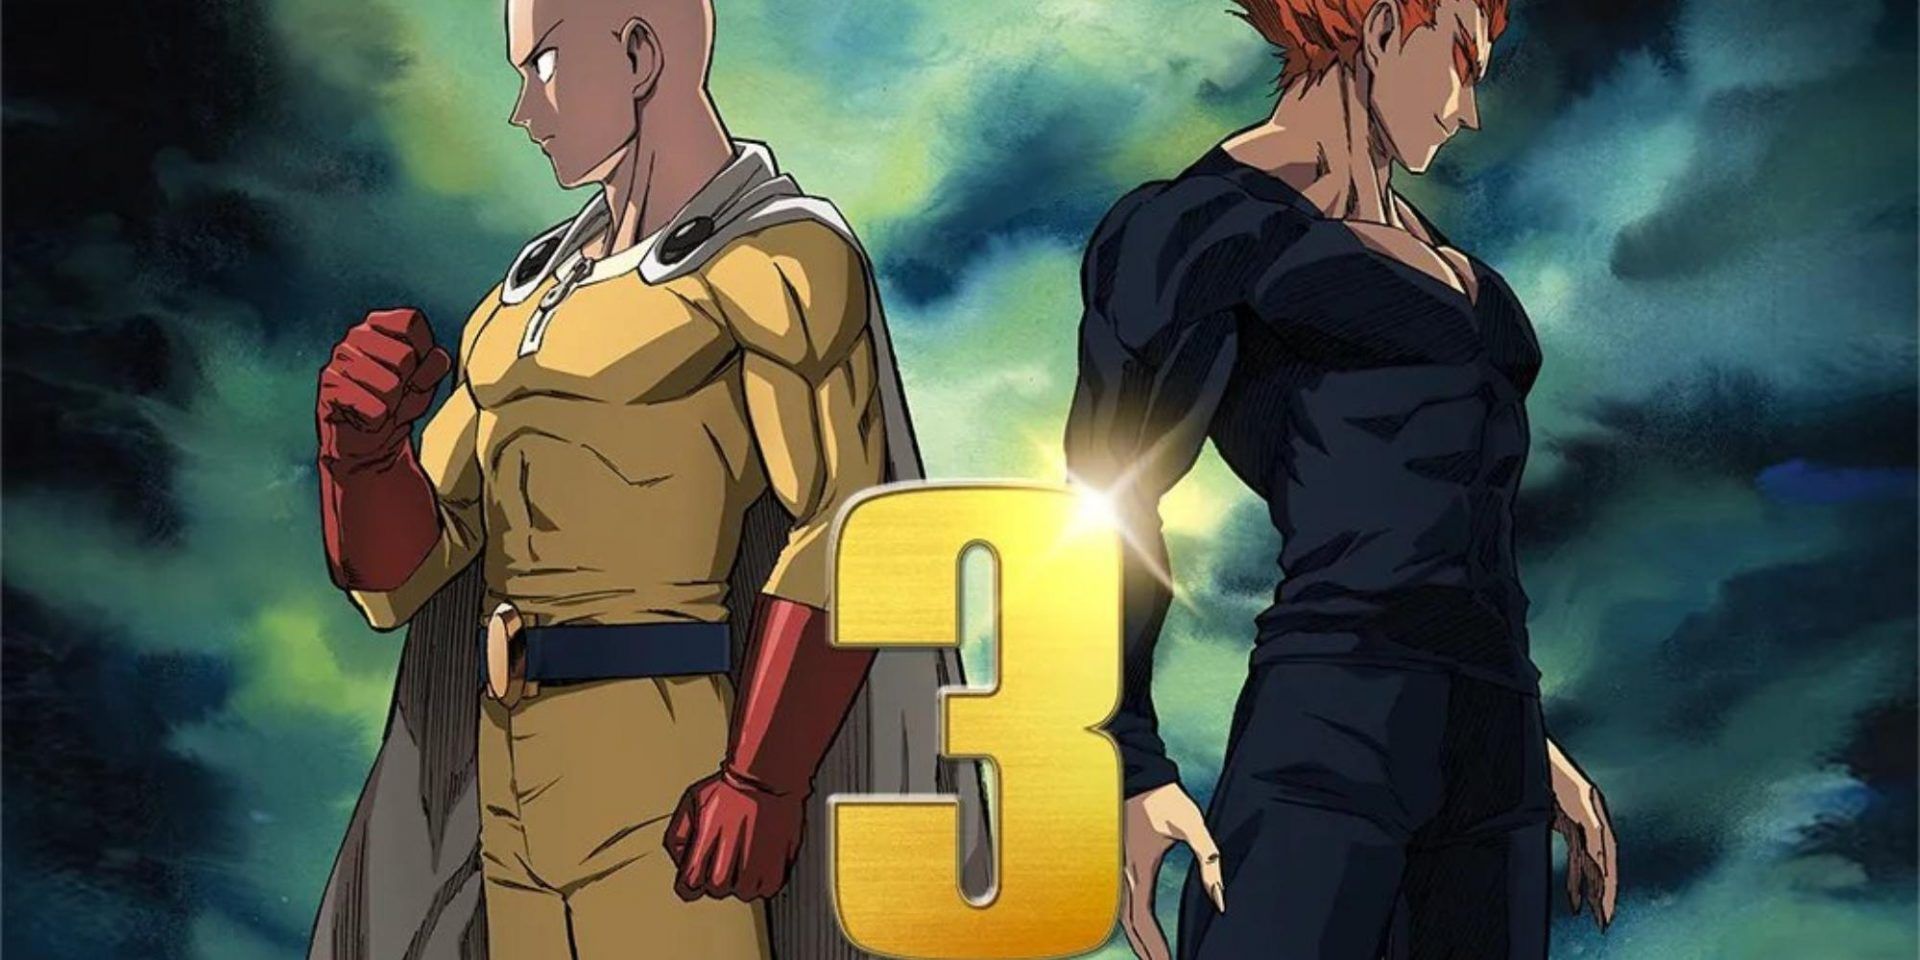 One Punch Man Season 3 Announced, Studio Yet to be Announced - GamerBraves